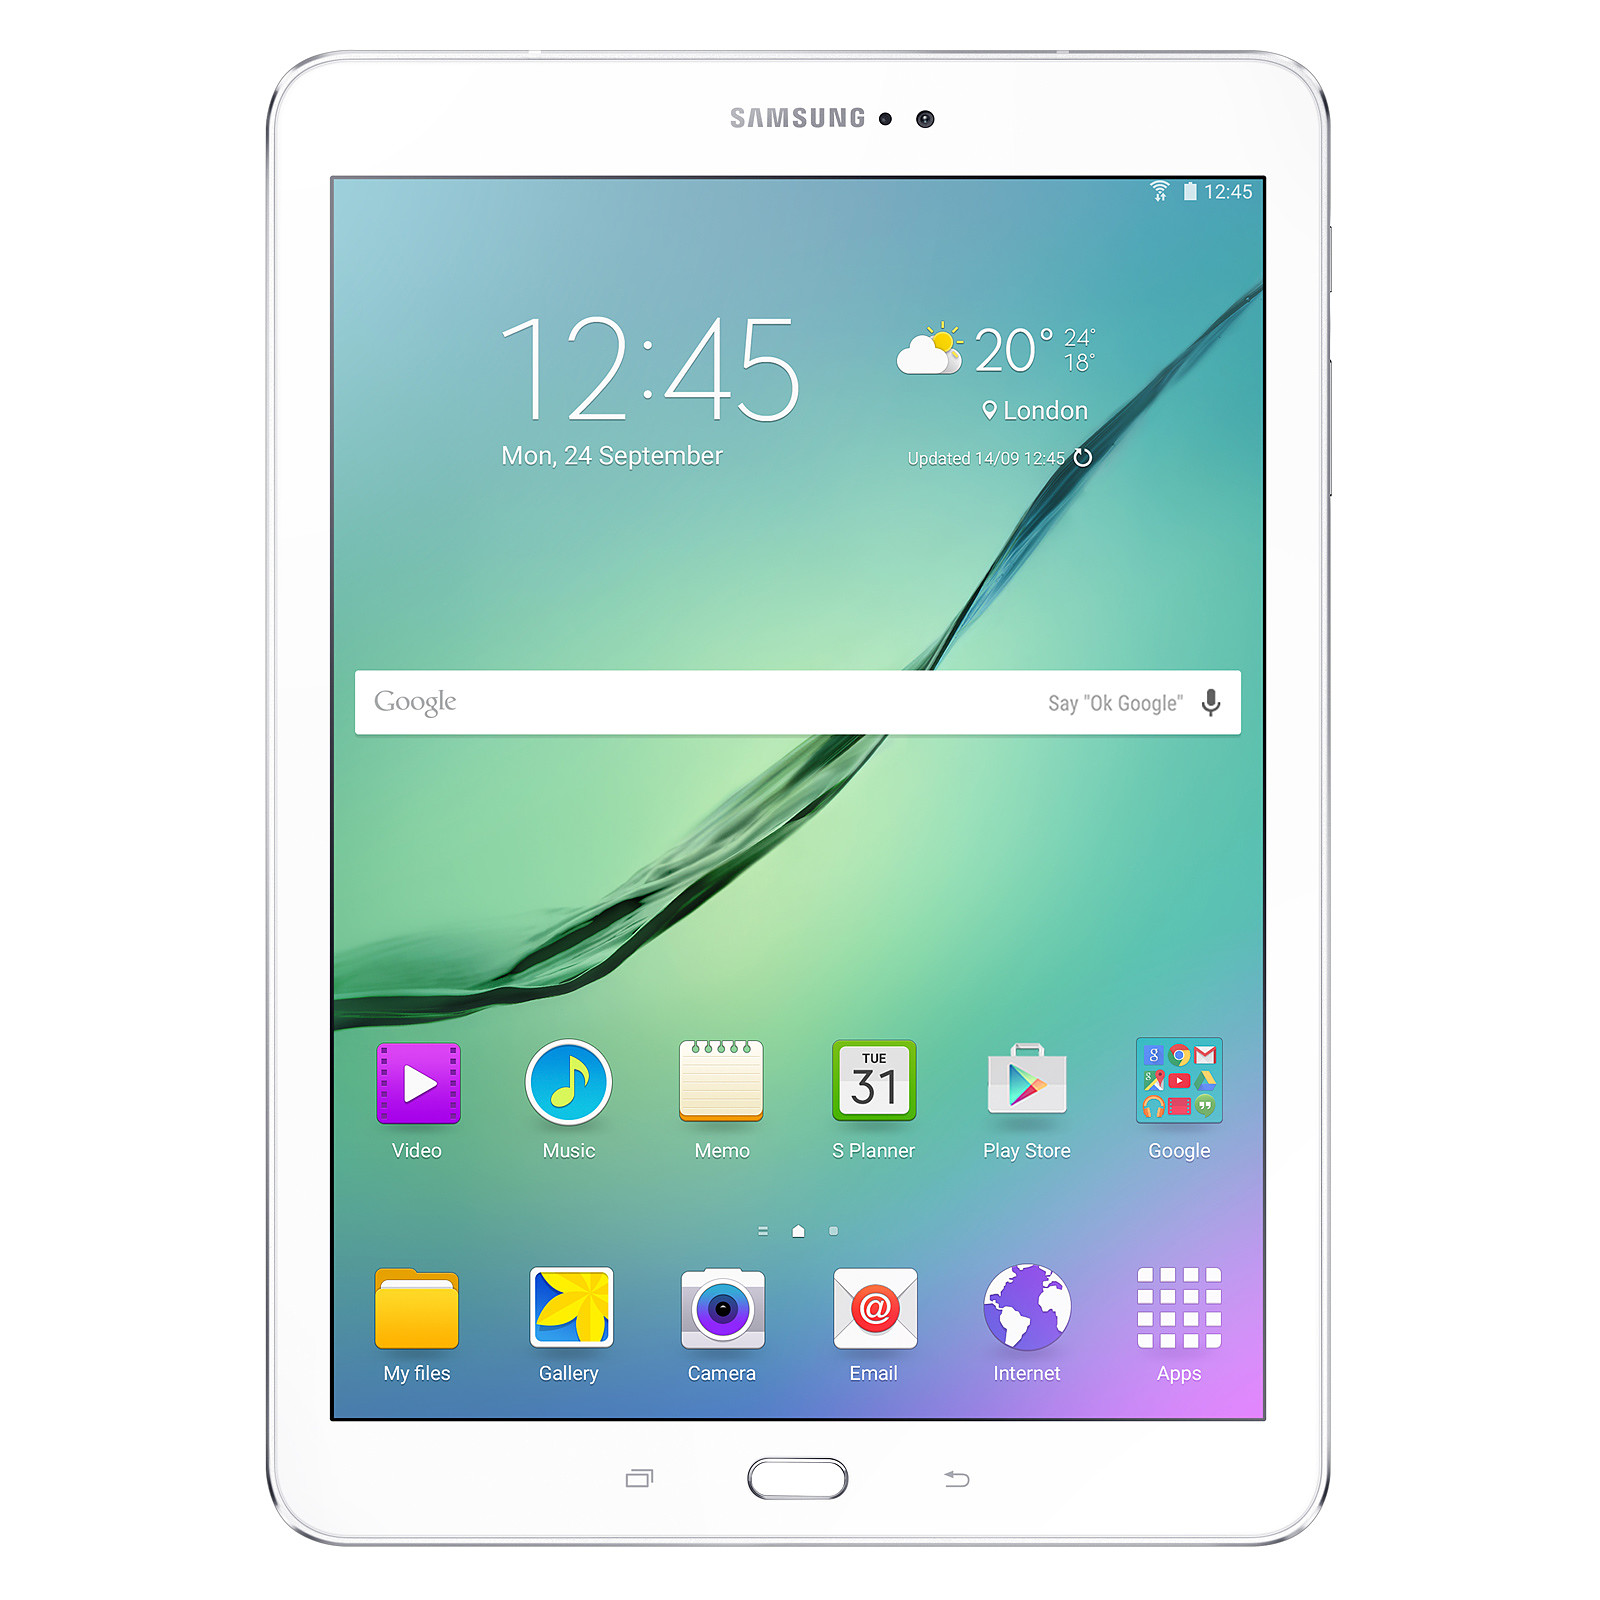 Samsung Galaxy Tab S2 9.7" SM-T810 32 Go Blanc · Reconditionne - Tablette tactile Samsung